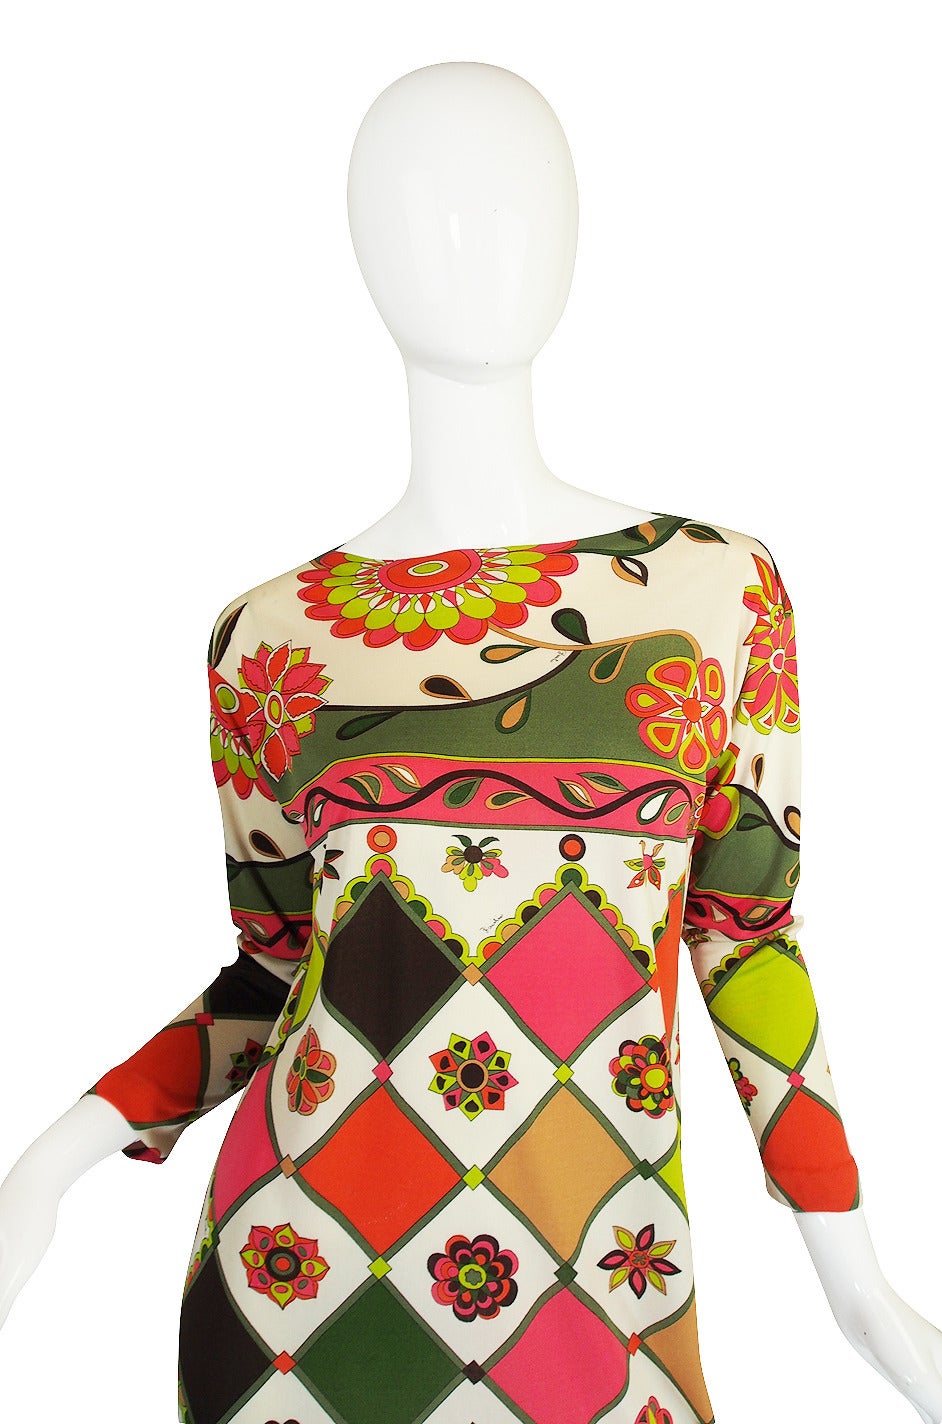 1960s Geometric & Floral Emilio Pucci Shift Dress In Excellent Condition For Sale In Rockwood, ON